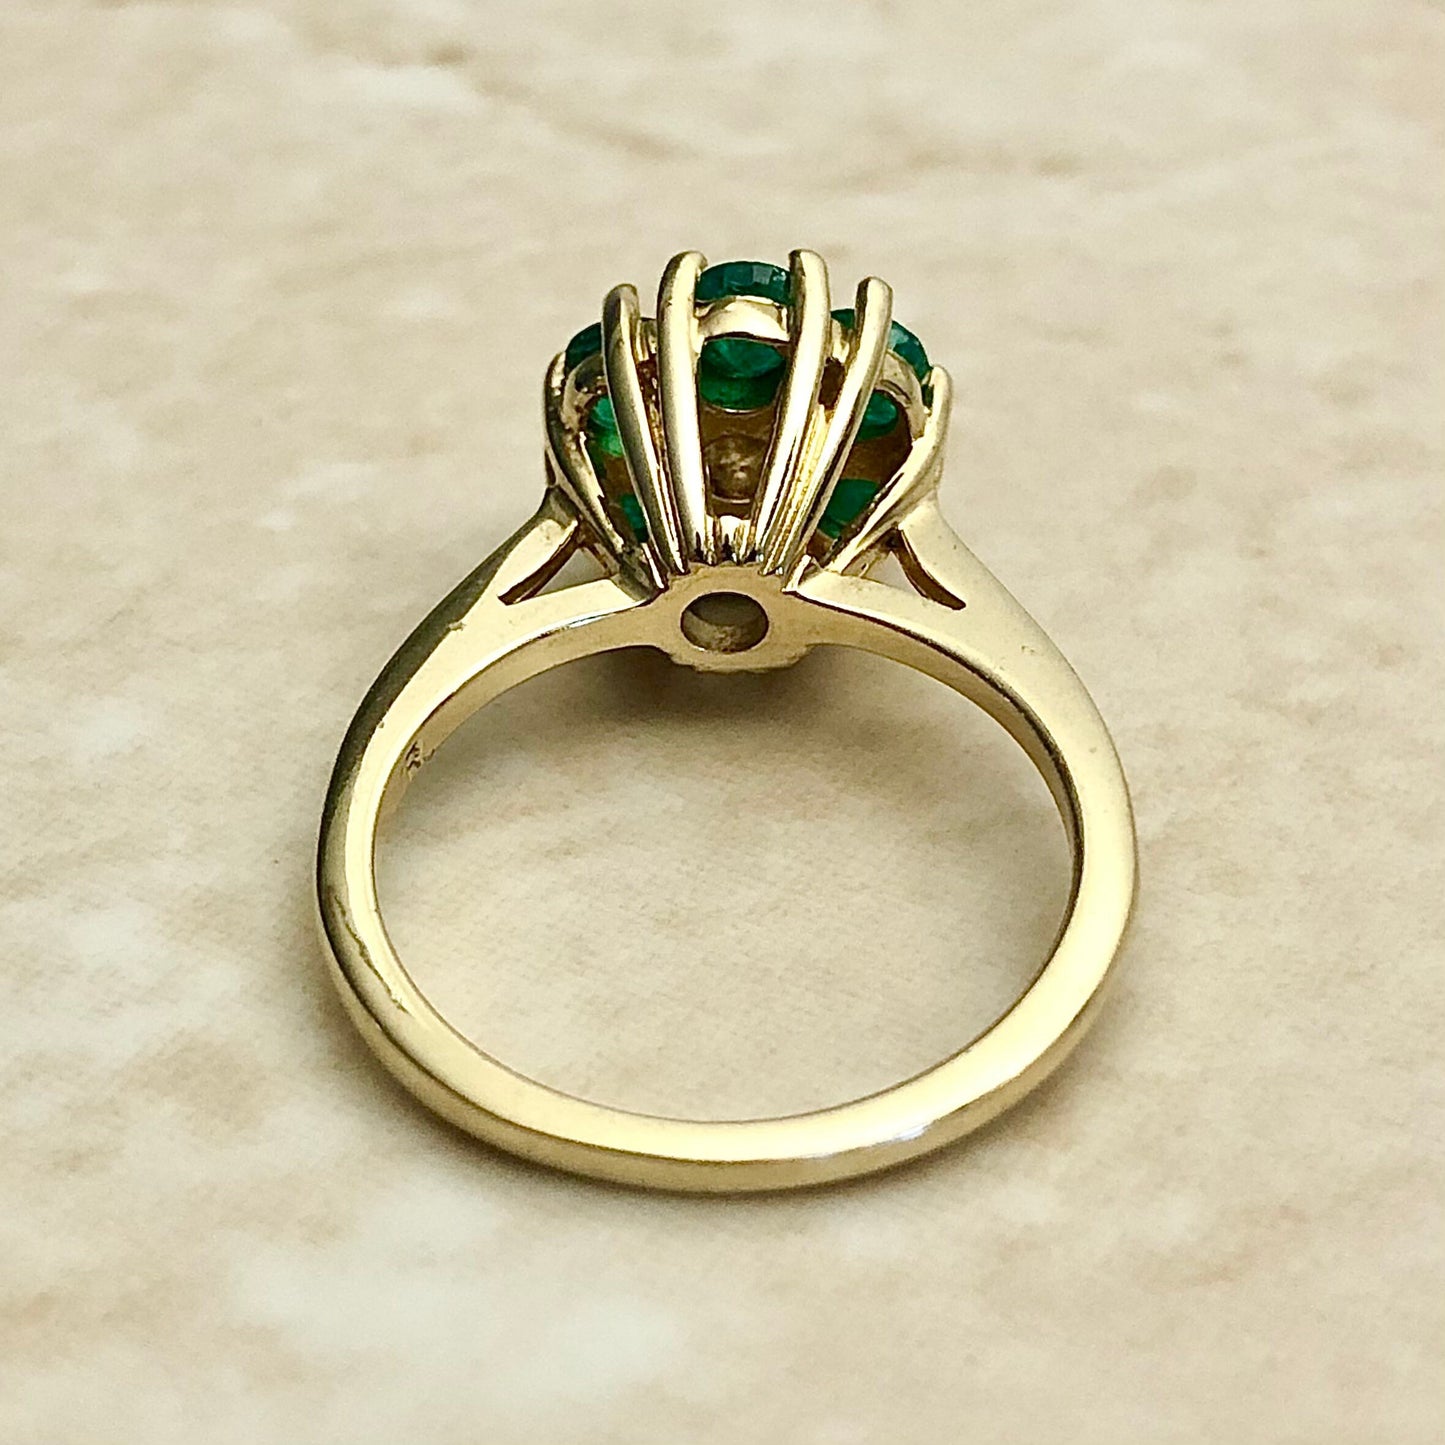 Fine Vintage 14 Karat Yellow Gold Diamond & Natural Emerald Halo Ring - April May Brithstone Gift - Cocktail Ring - Promise Ring - Size 6.25